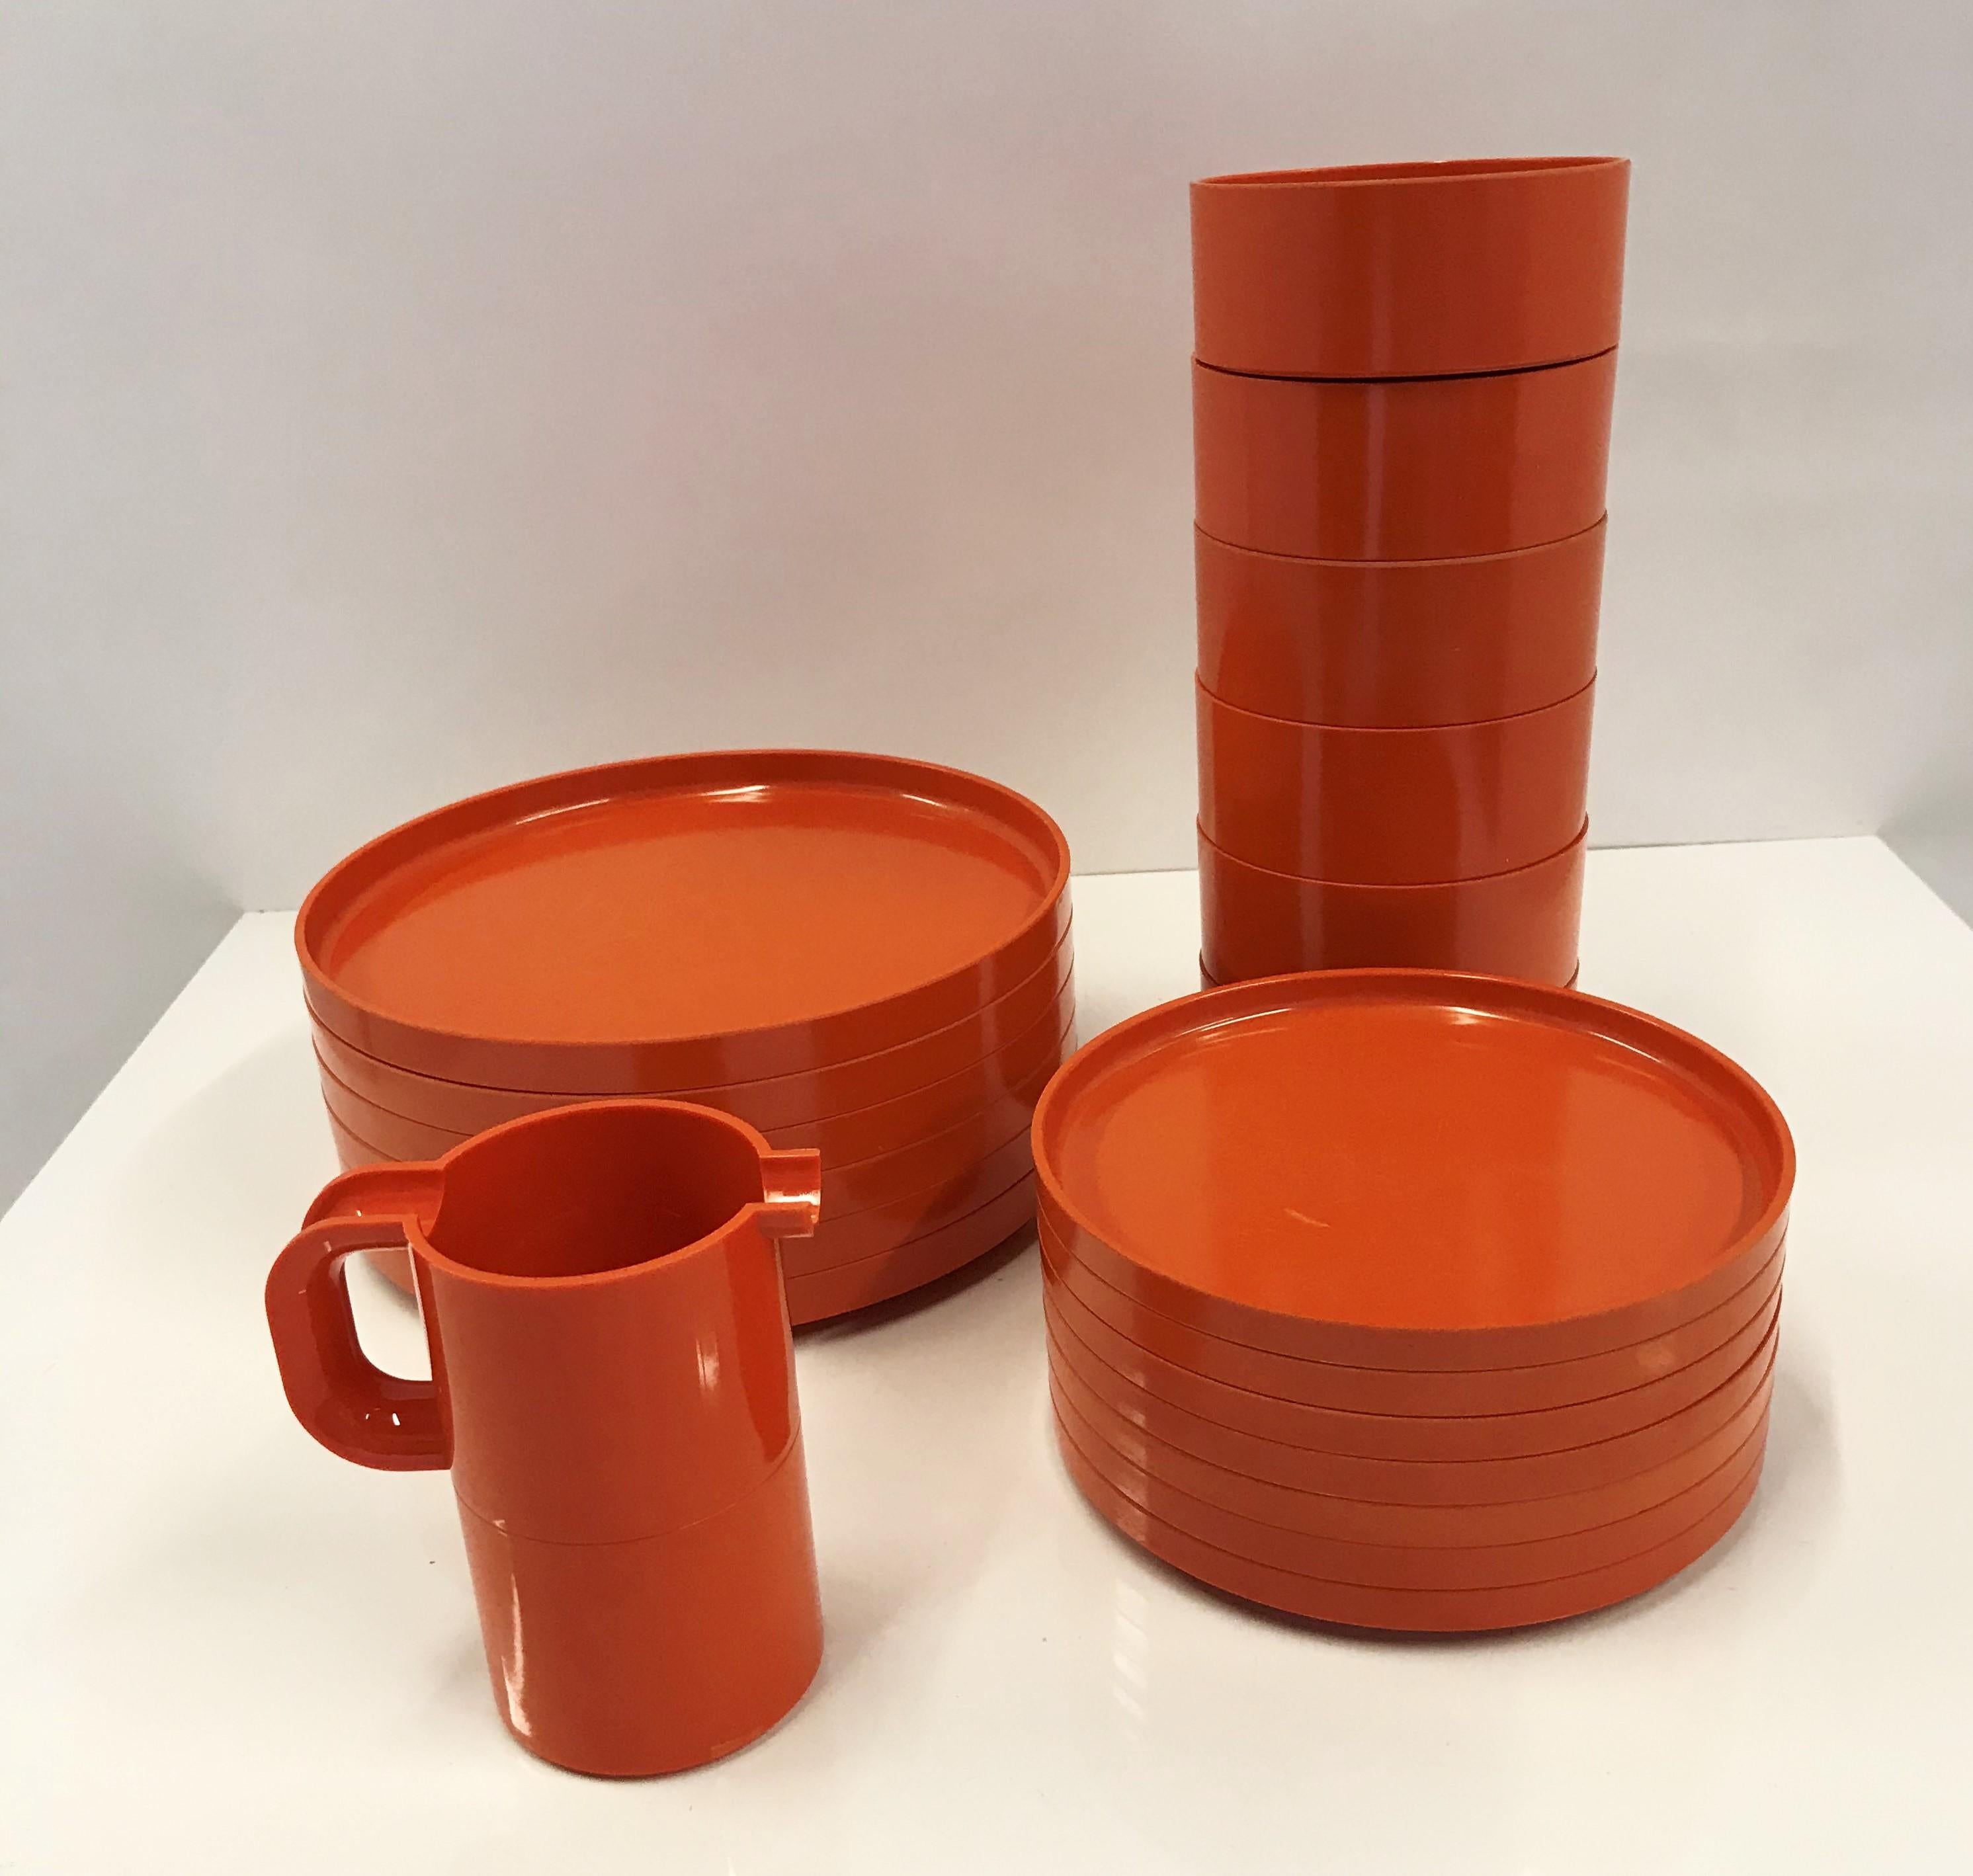 Designed by Massimo and Lella Vignelli for Heller in 1964, a set of 22 dinnerware pieces for 6 in fun Orange. They were originally manufactured in Italy until 1971 when production moved to the United States. All pieces of this dinnerware were made